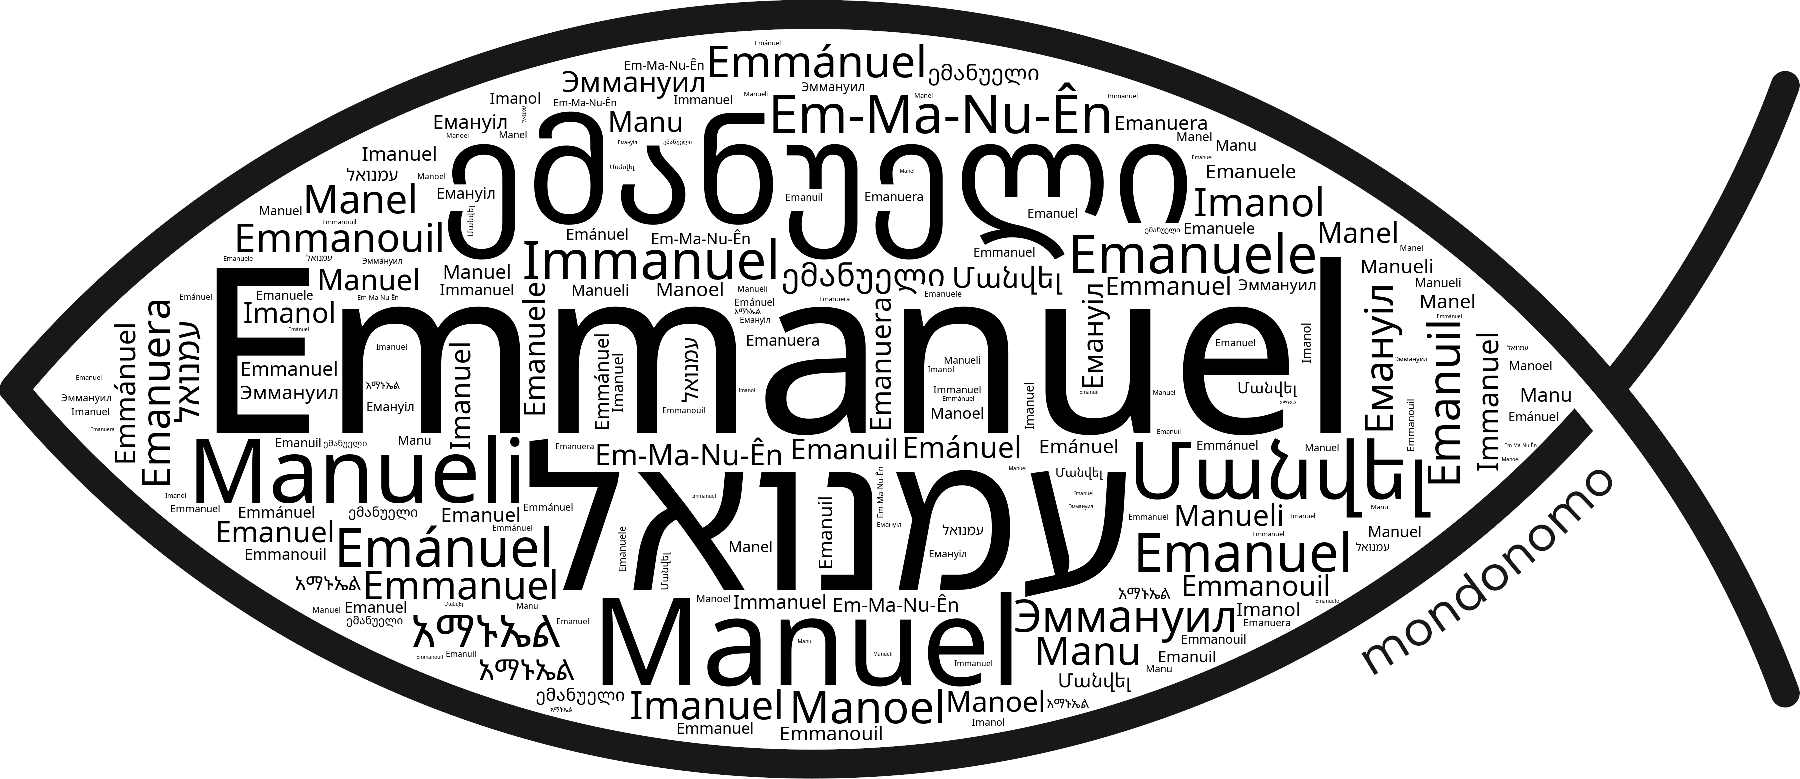 Name Emmanuel in the world's Bibles